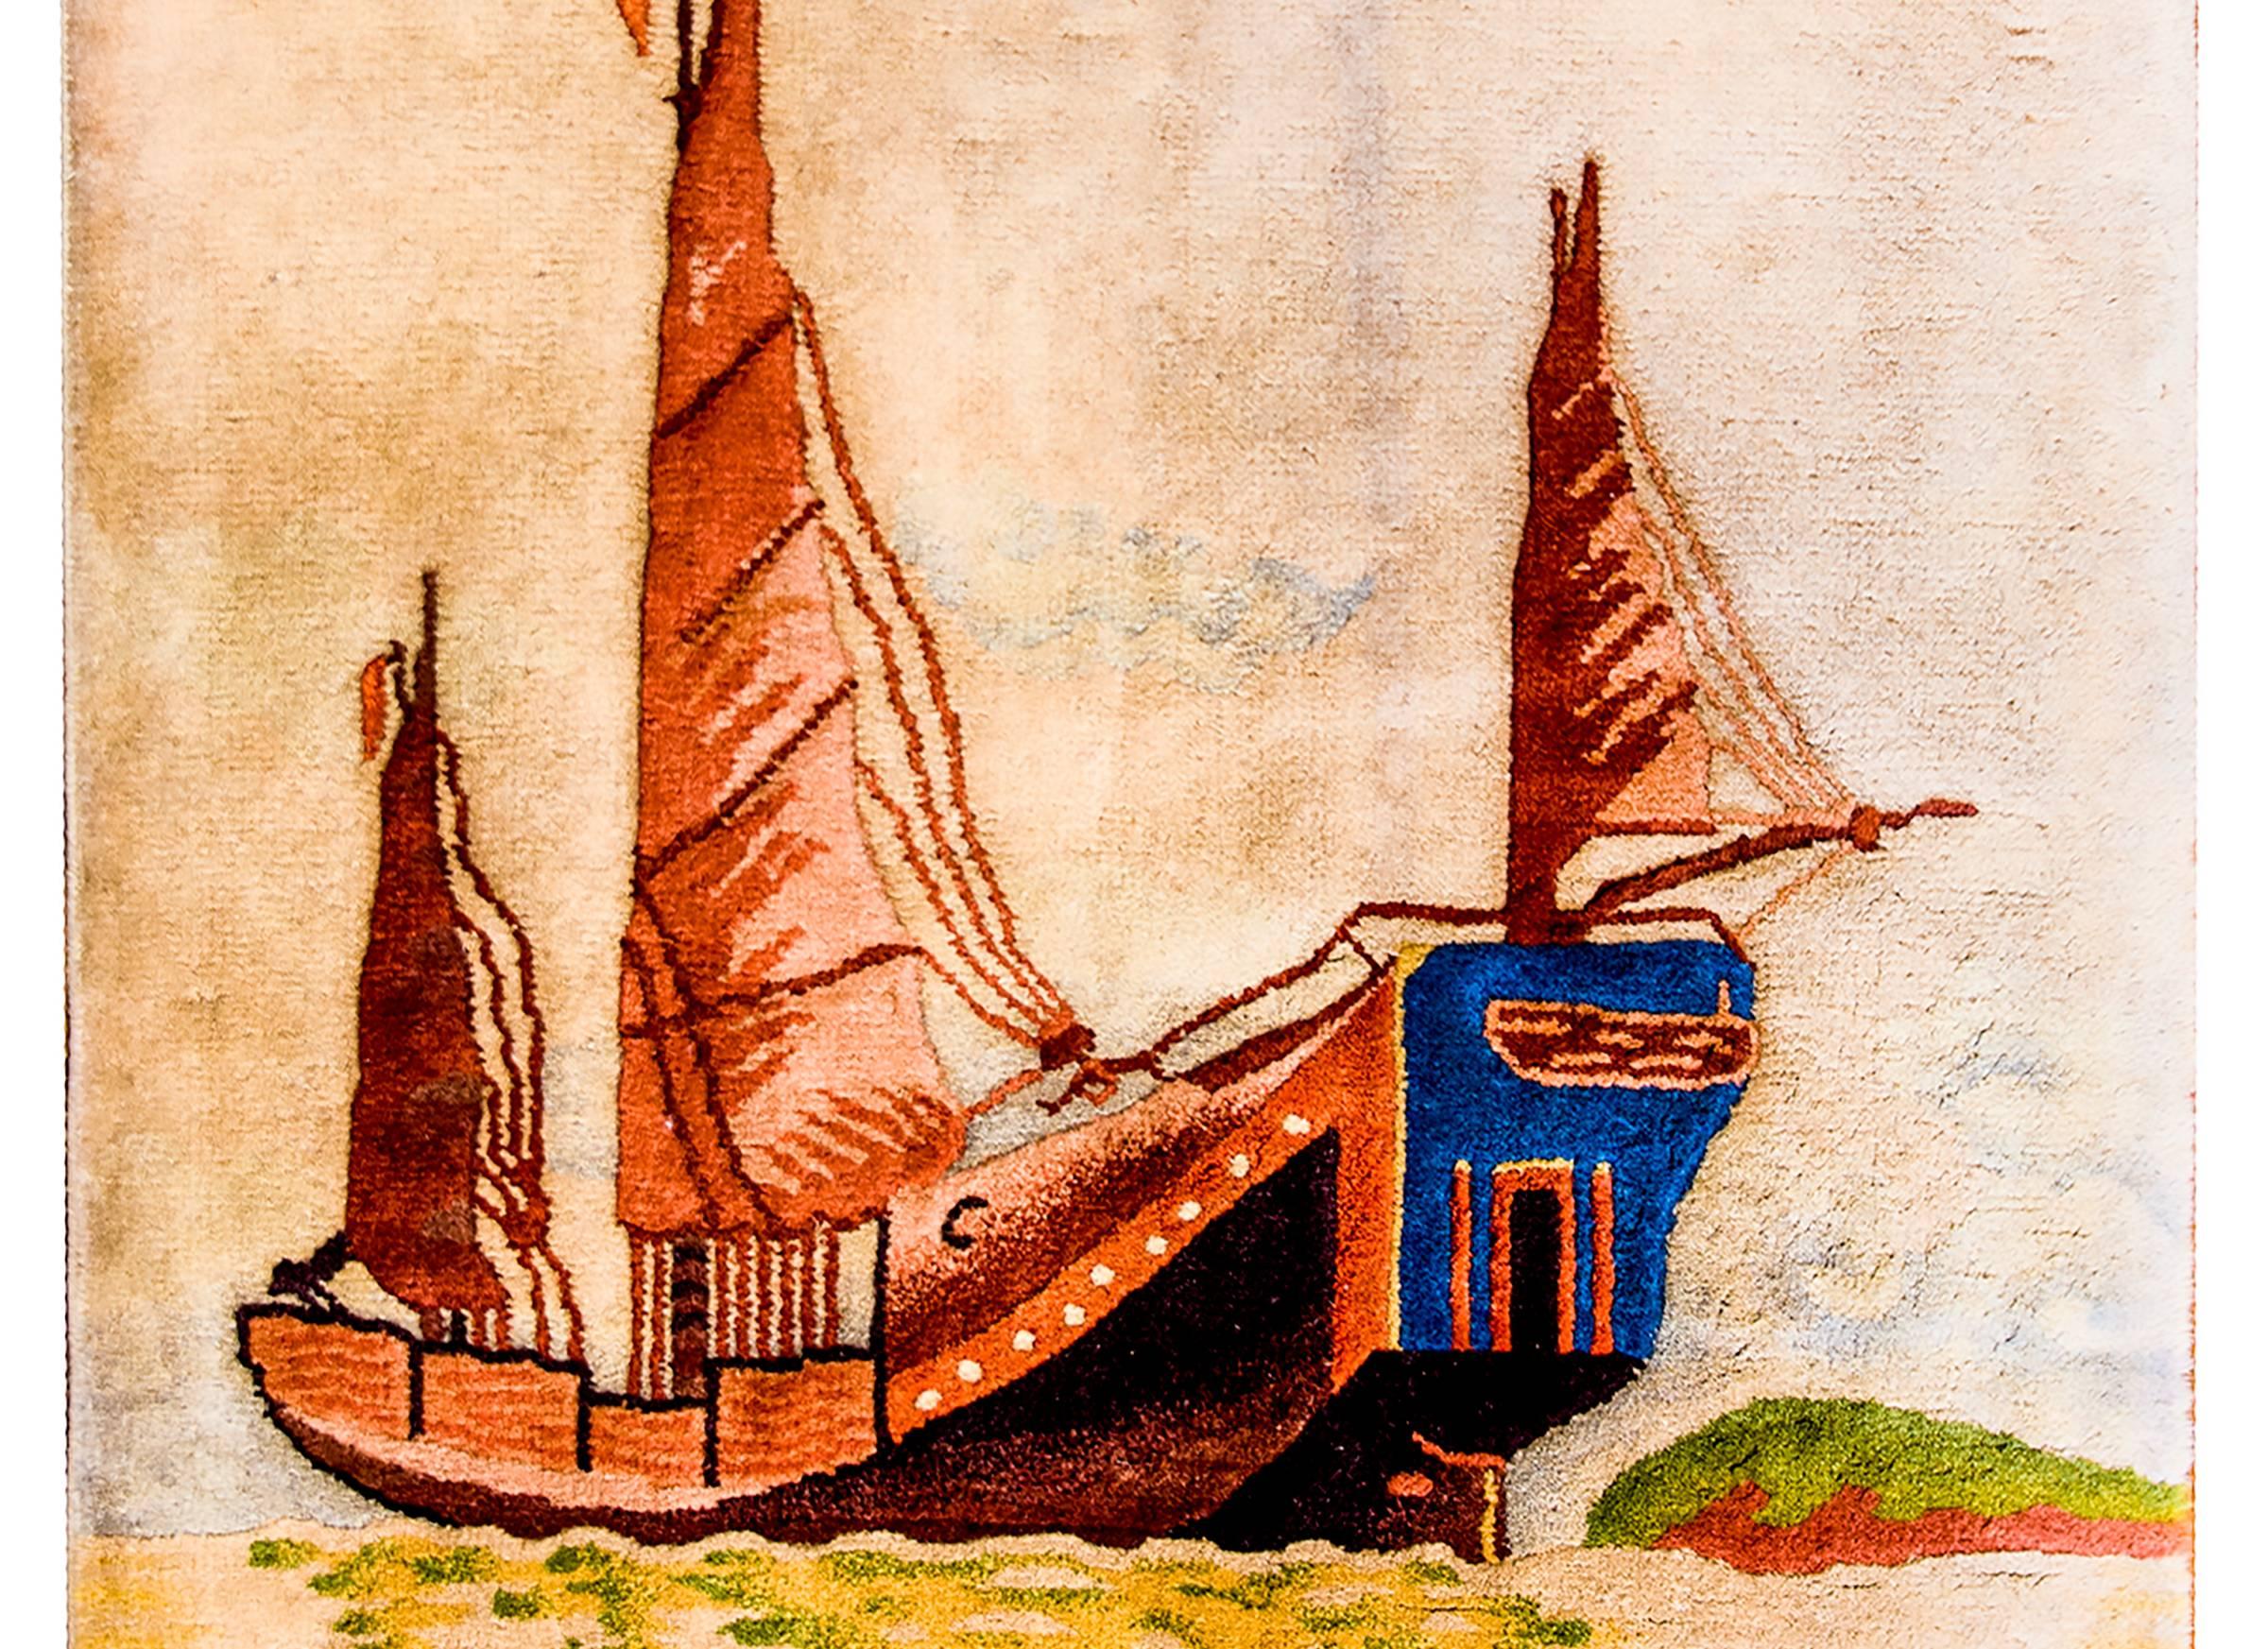 An unusual Chinese Art Deco Rug with a large Chinese Junk ship, sea sailing vessels used by the Chinese since the Song Dynasty, woven with a sophisticated multi colored background and no border.